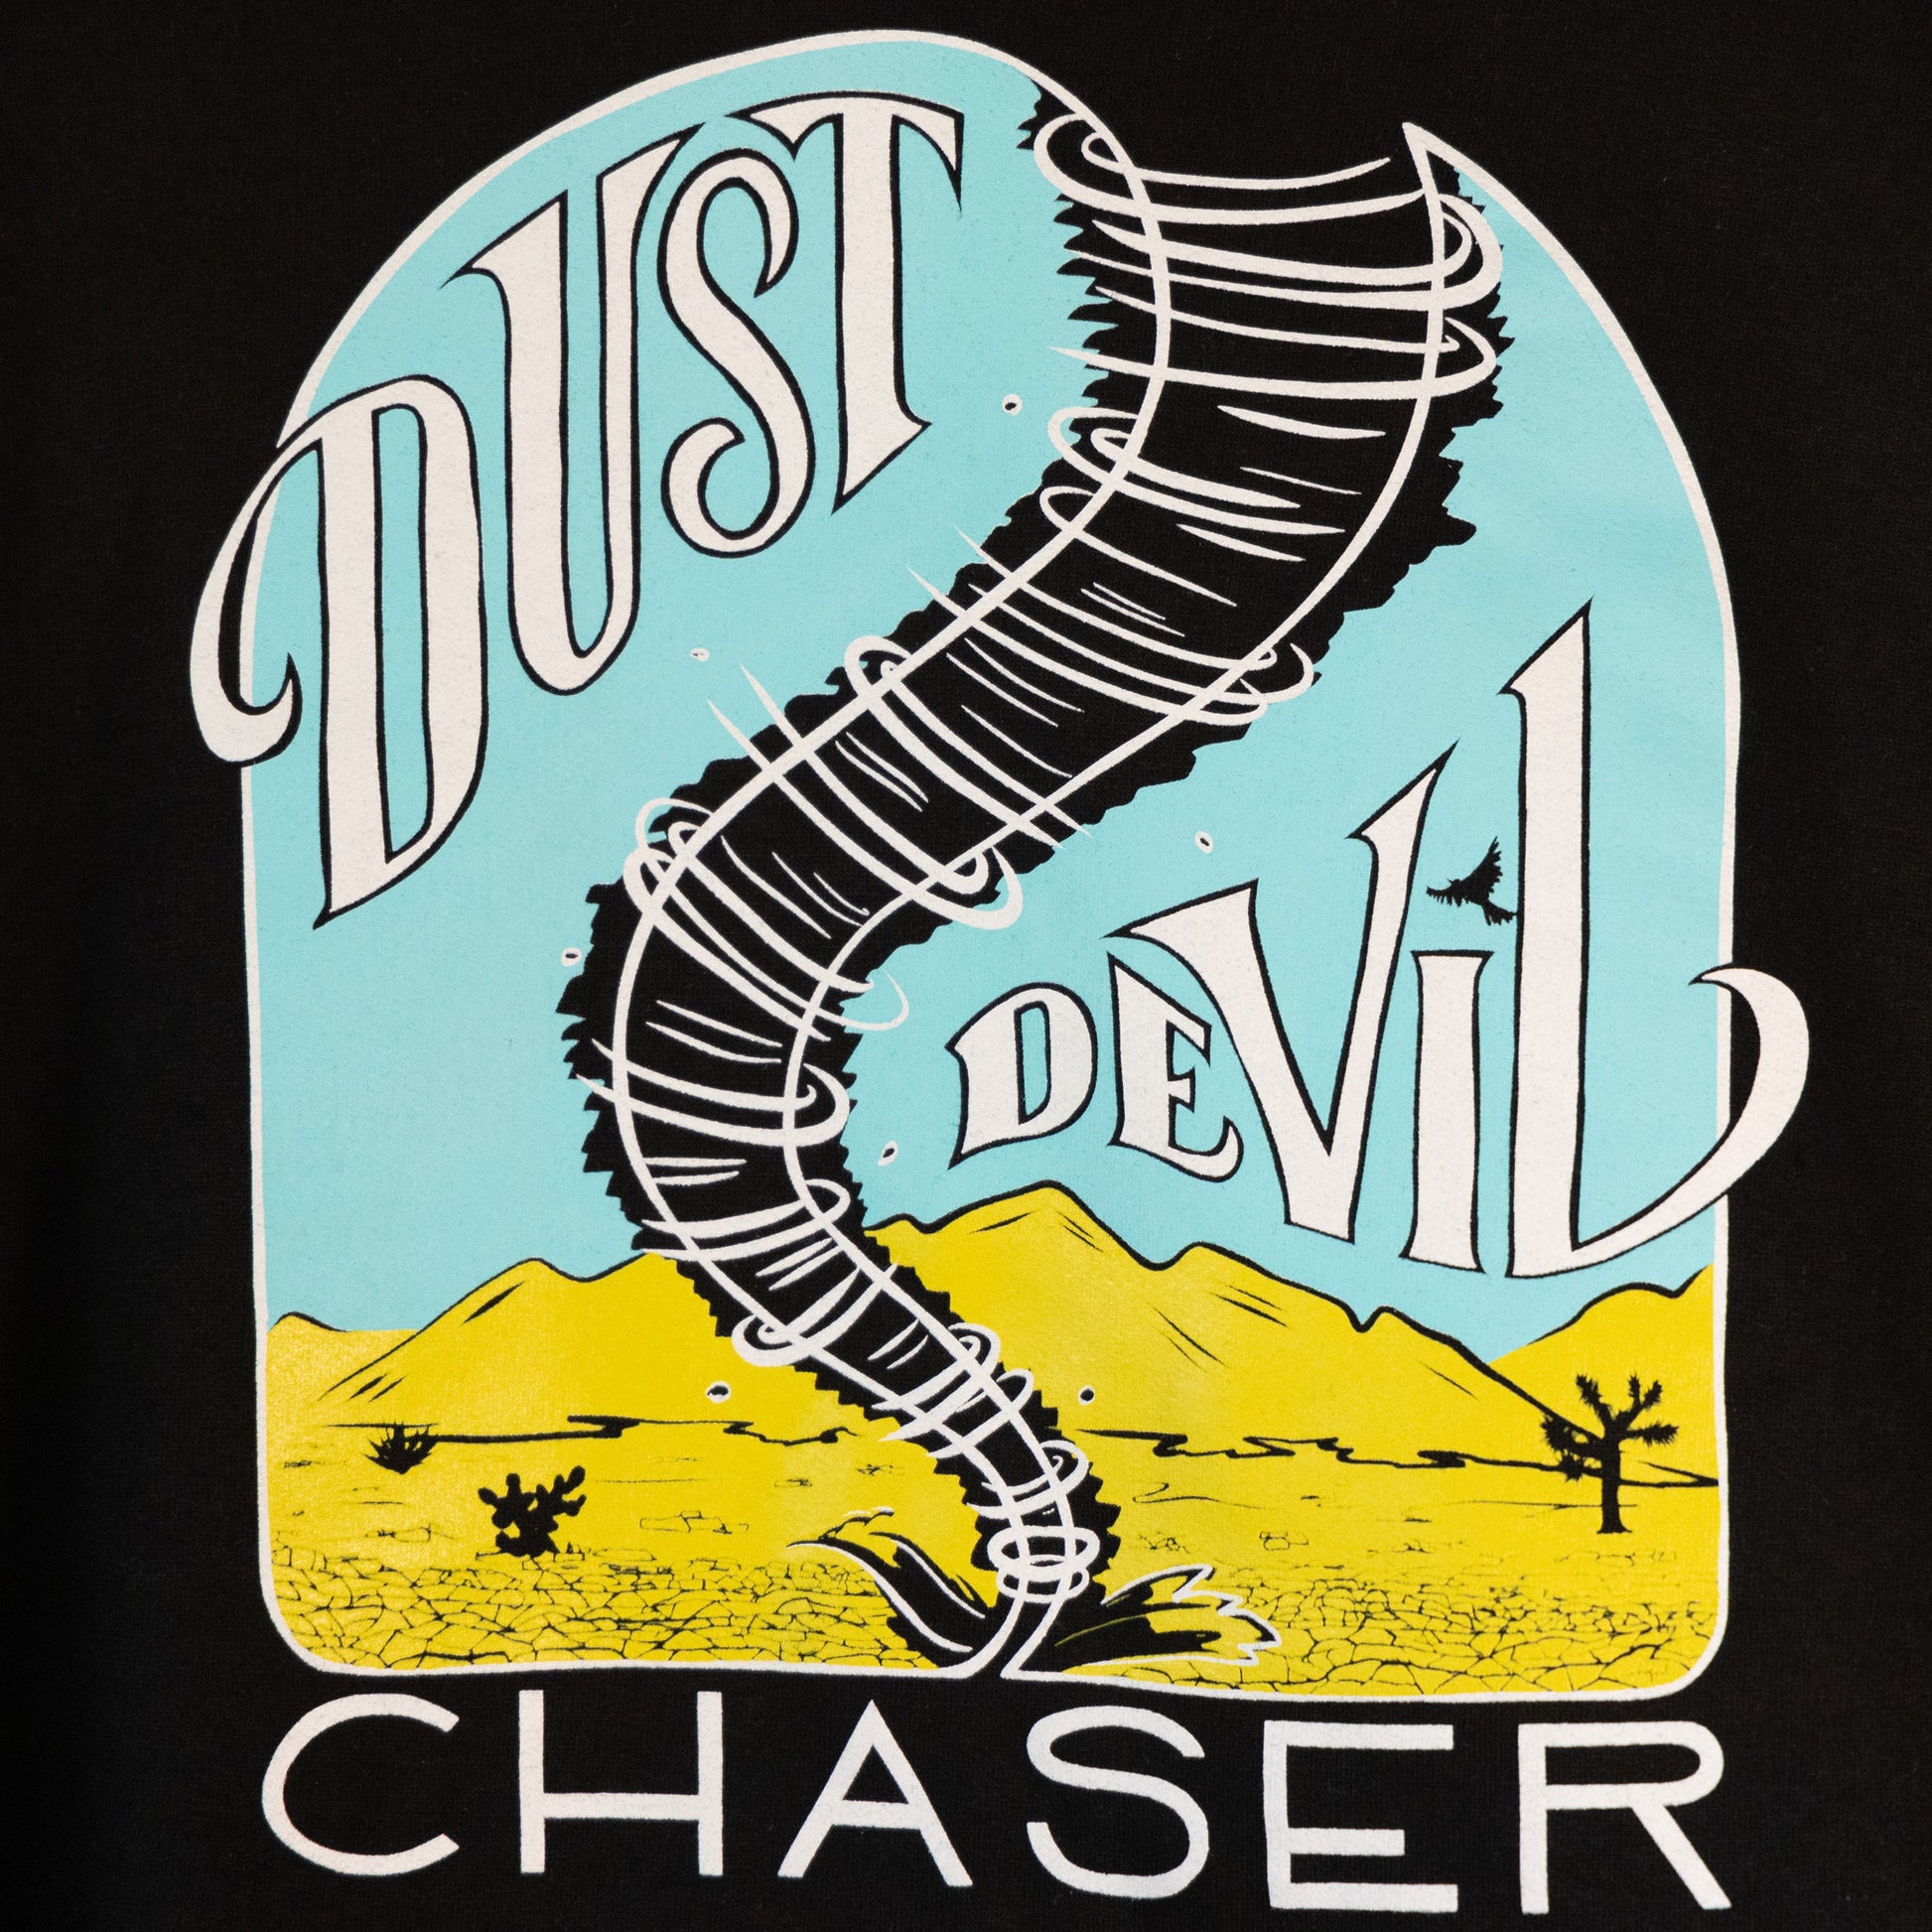 A close up of the design. The gender neutral hooded black colored sweatshirt has a white, bright blue, and yellow dust devil illustration in the center. The words "Dust Devil Chaser" are written in a white handwritten font within and below the design.